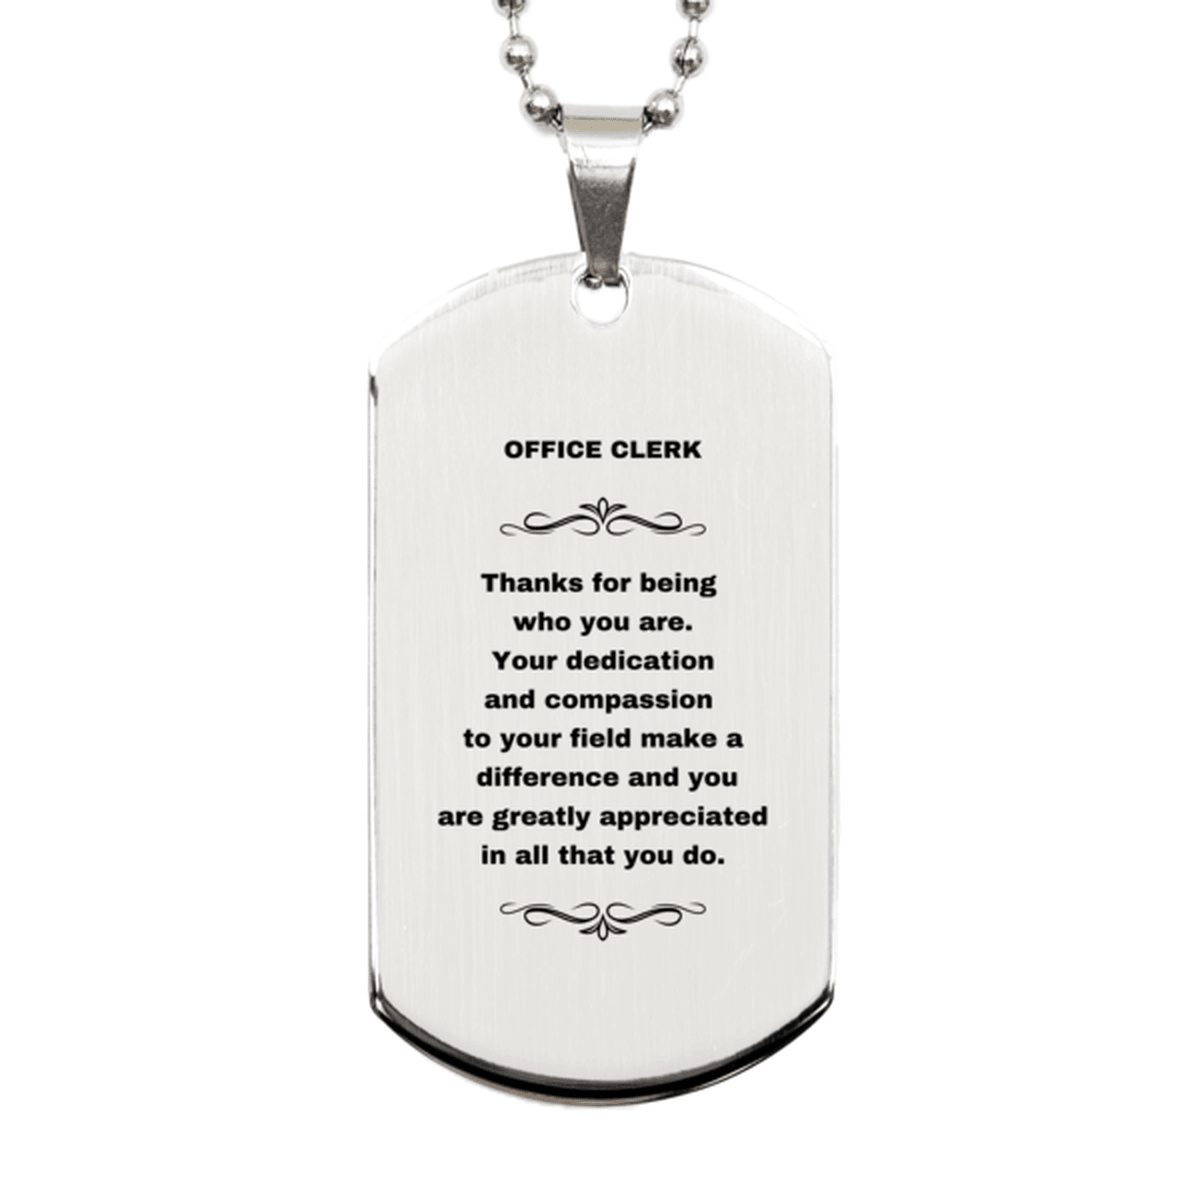 Office Clerk Silver Dog Tag Necklace - Thanks for being who you are - Birthday Christmas Jewelry Gifts Coworkers Colleague Boss - Mallard Moon Gift Shop